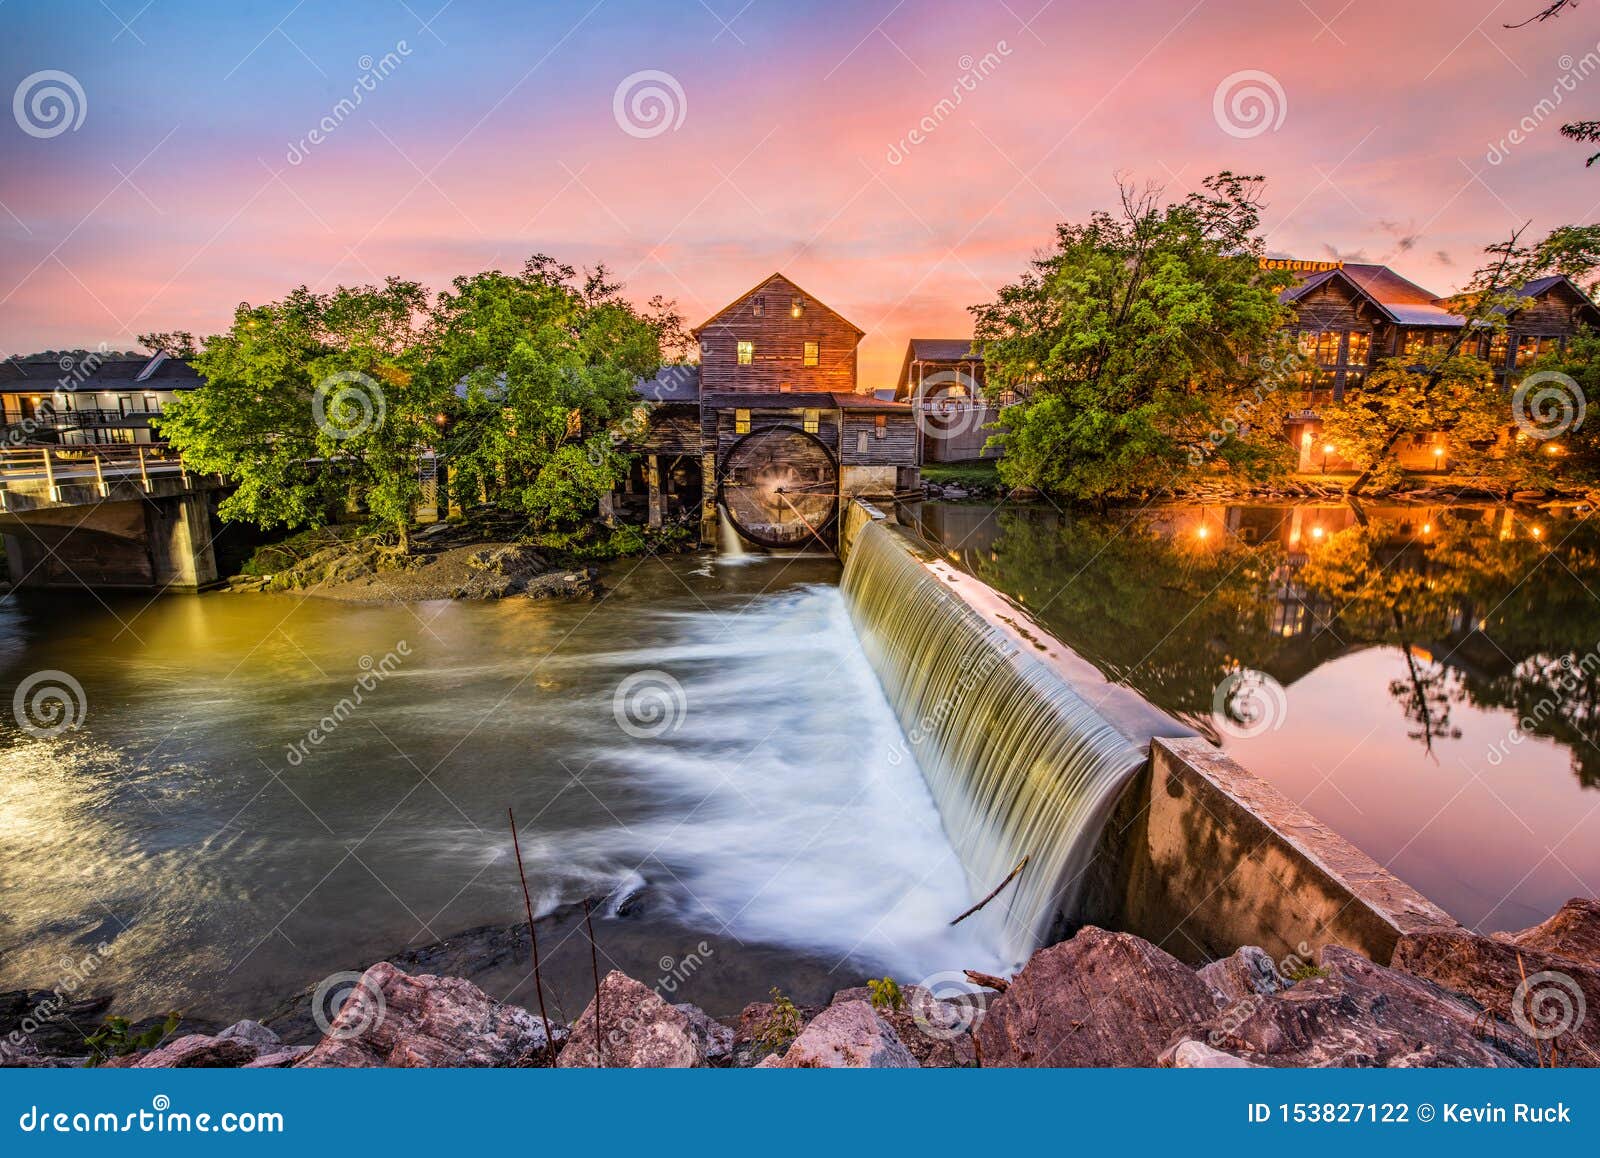 pigeon forge tennessee tn old mill at sunrise